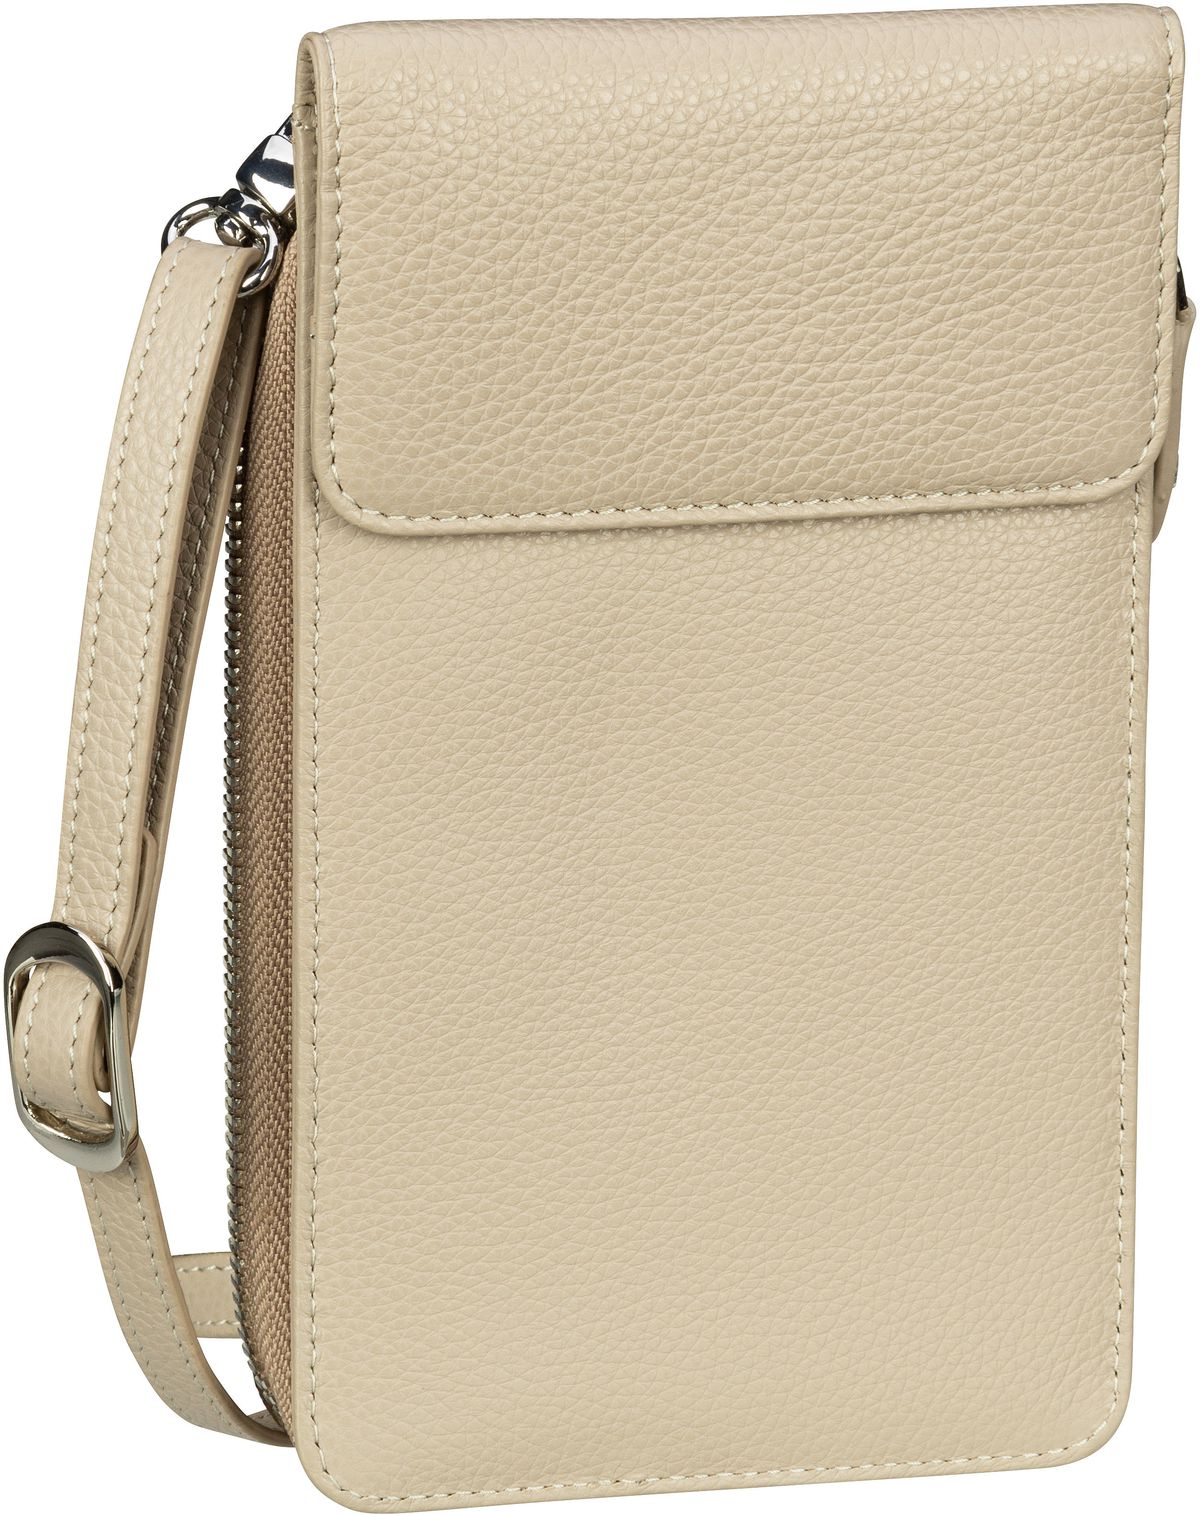 Golden Head Palma RFID Protect 4045 - Taupe